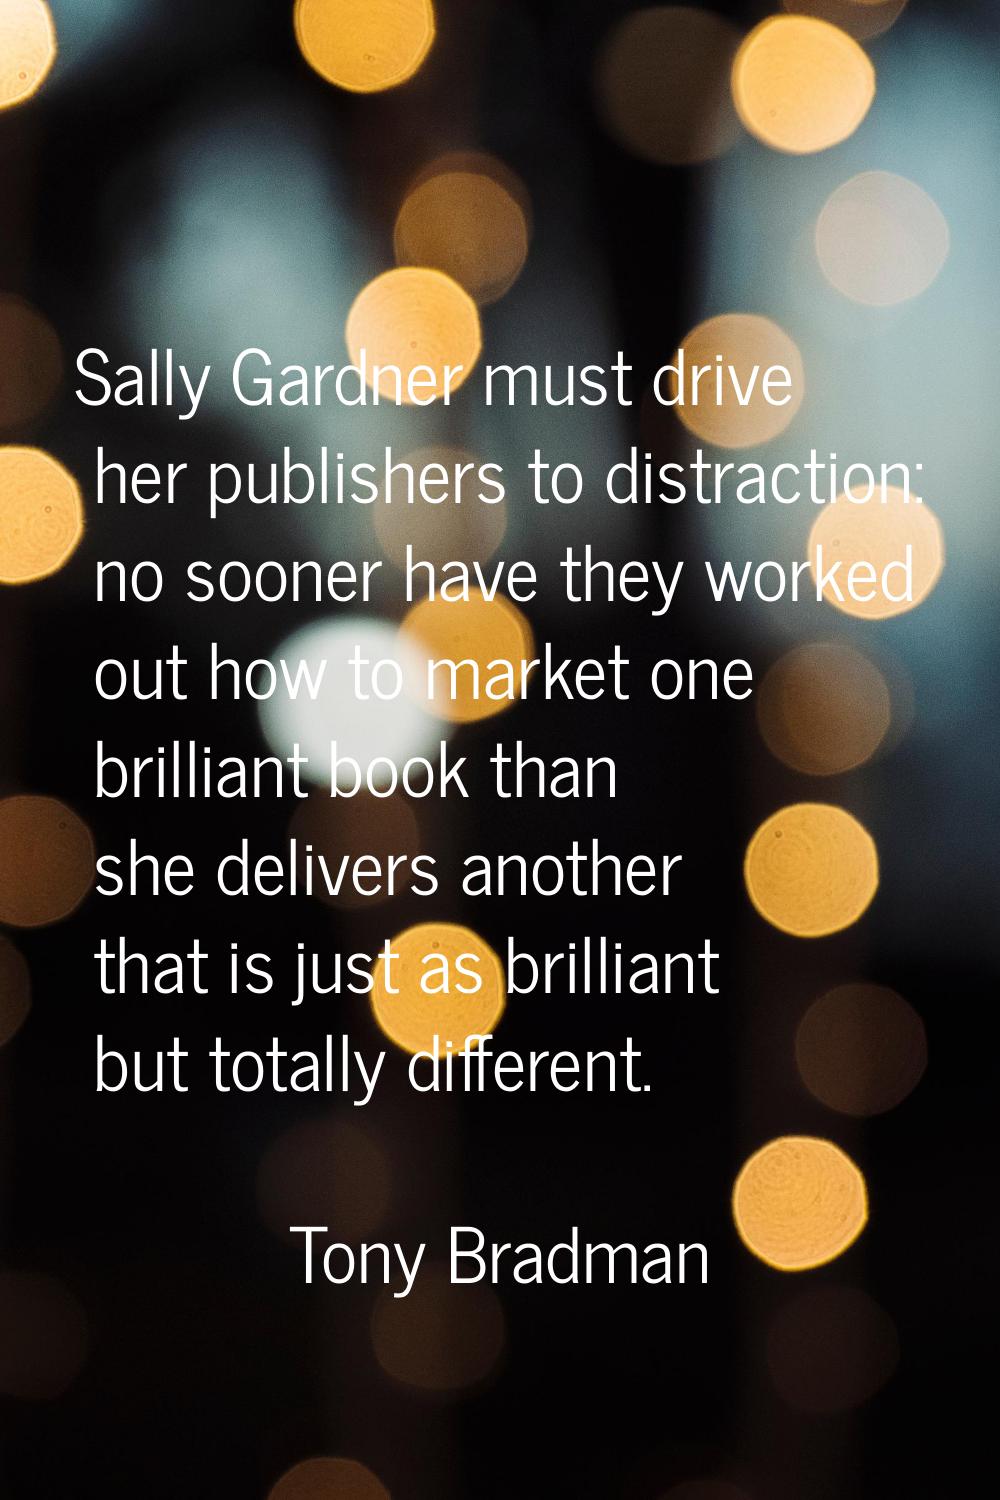 Sally Gardner must drive her publishers to distraction: no sooner have they worked out how to marke